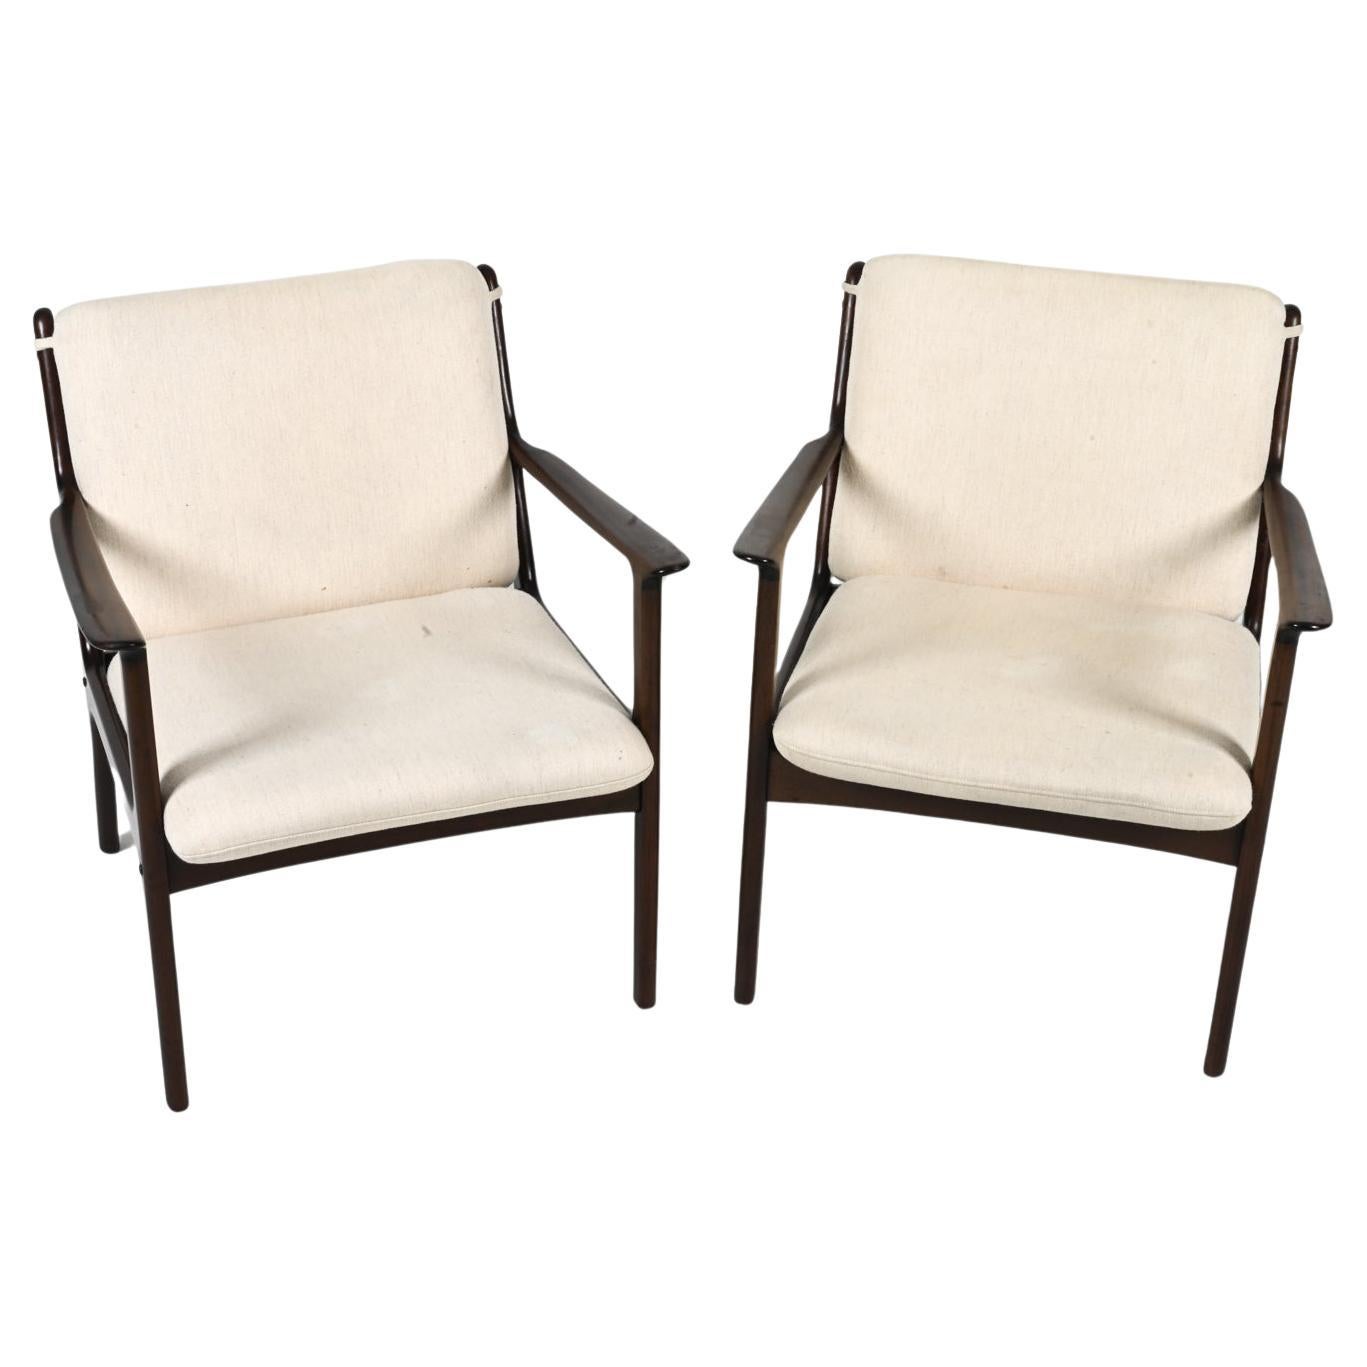 Pair of Mahogany Lounge Chairs, Model PJ 112 by Ole Wanscher for Poul Jeppesen For Sale